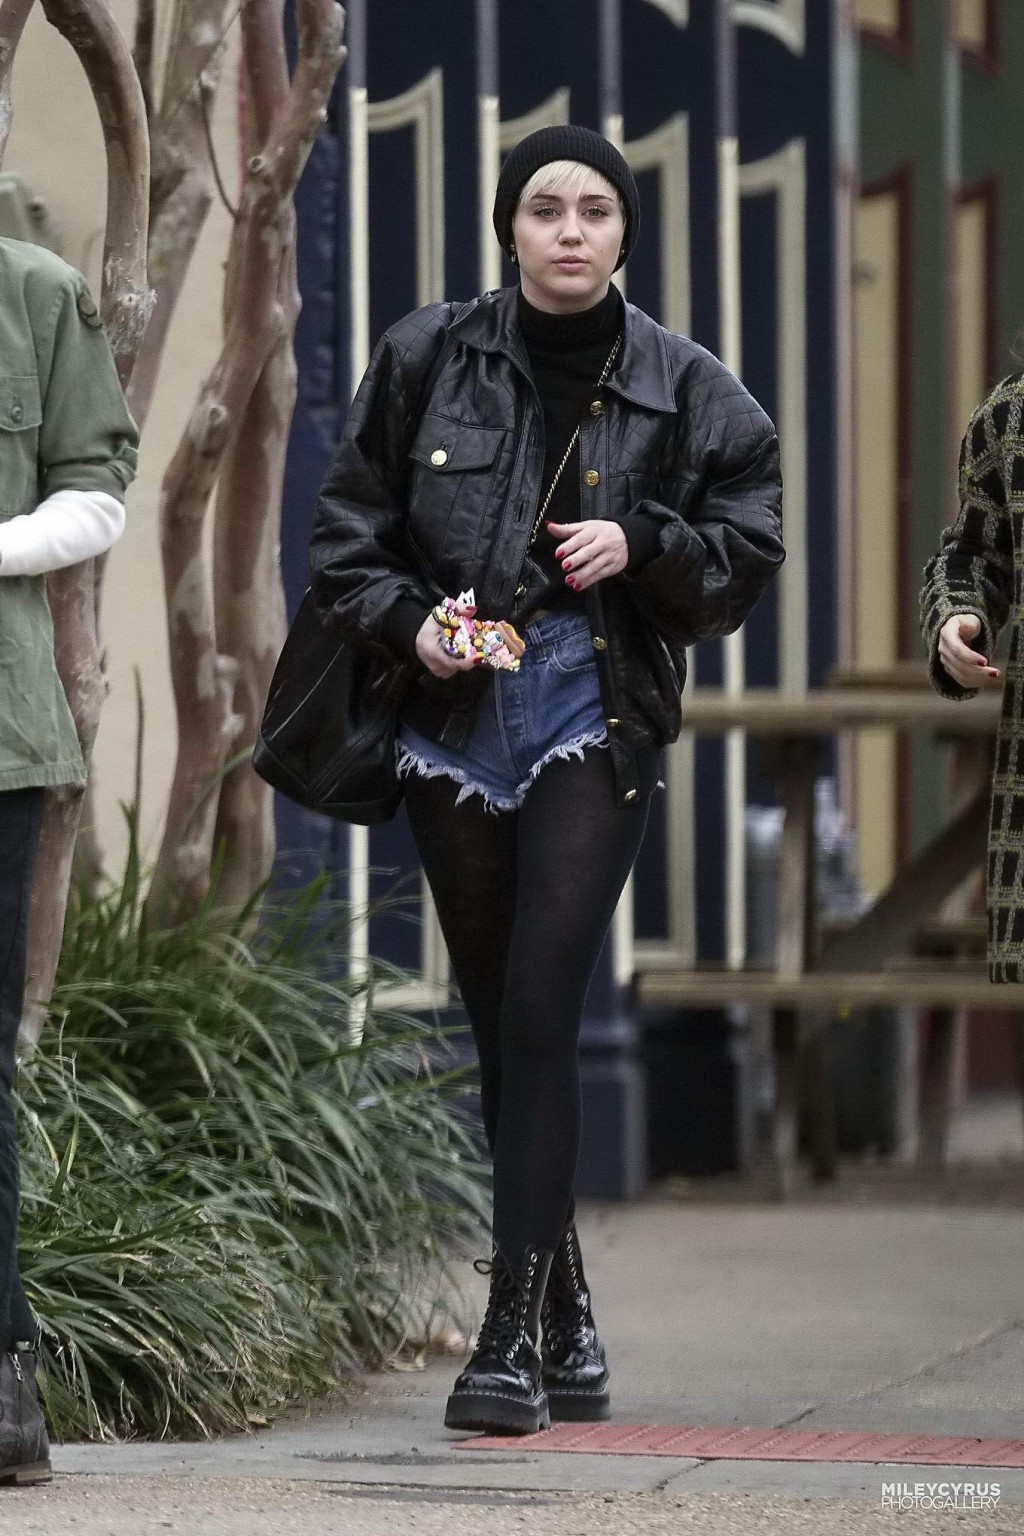 Miley Cyrus shows off her legs and ass wearing the denim shorts  black pantyhose #75201596